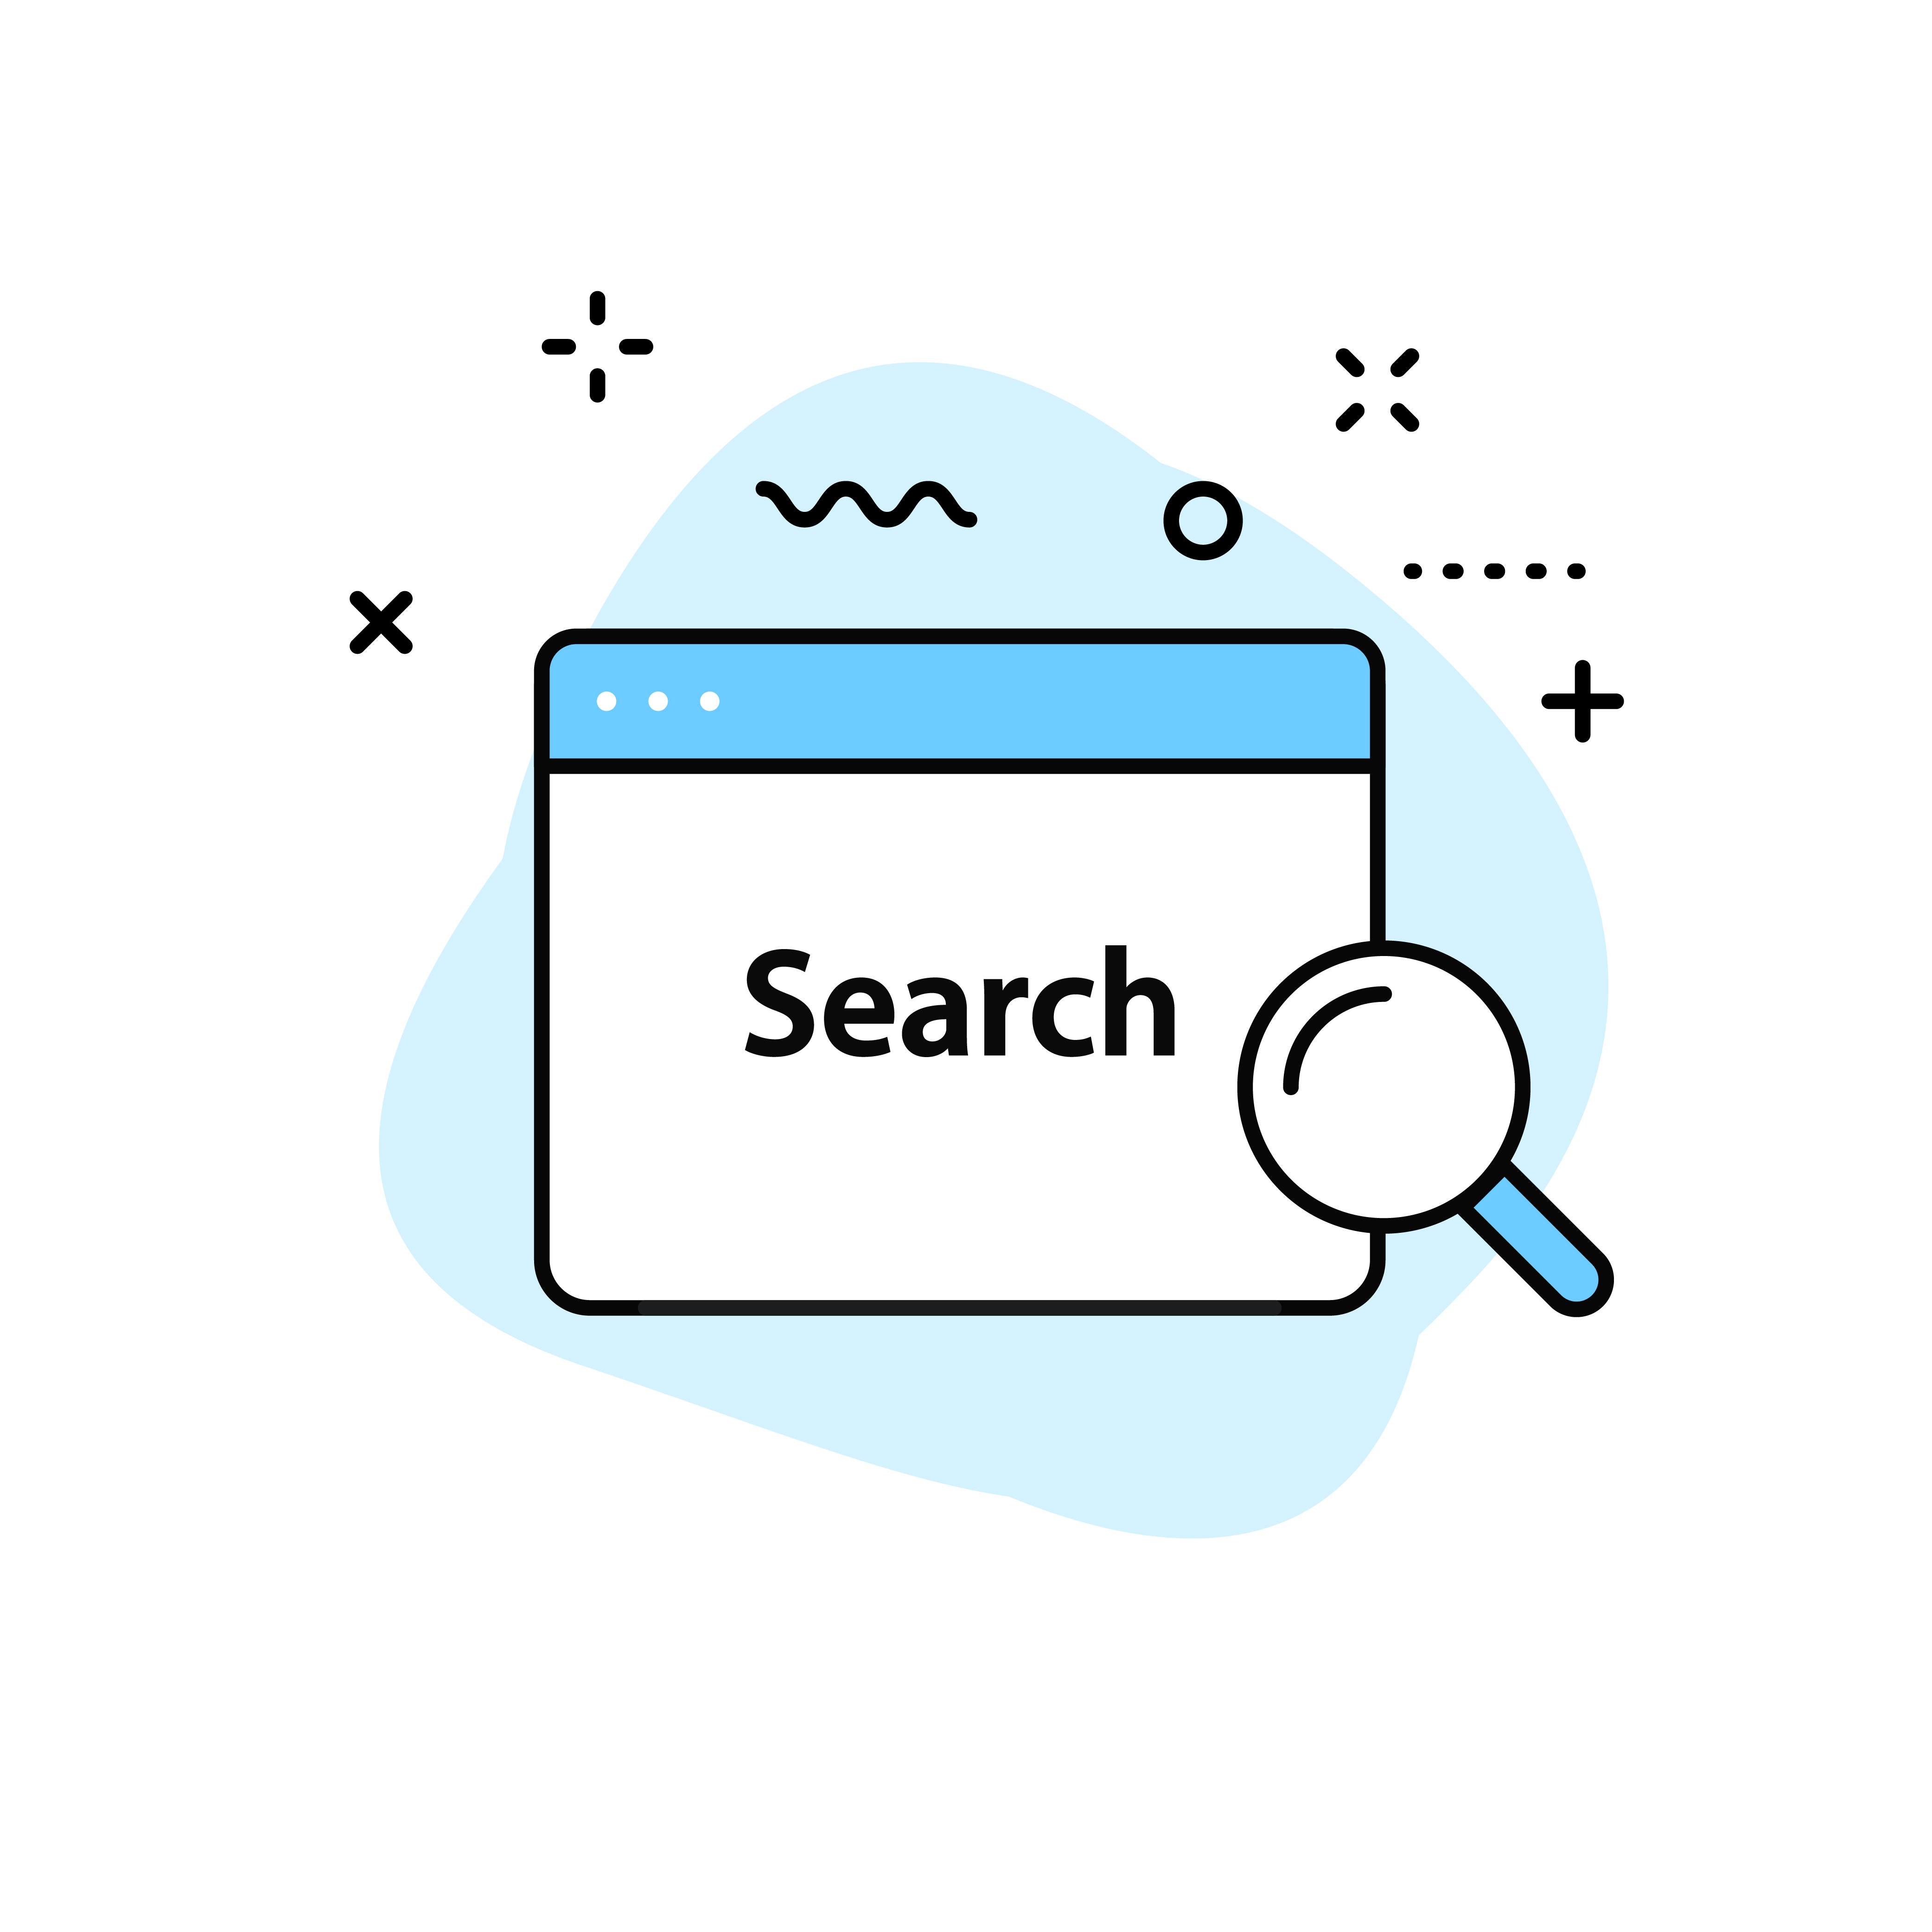 reverse image search need in seo